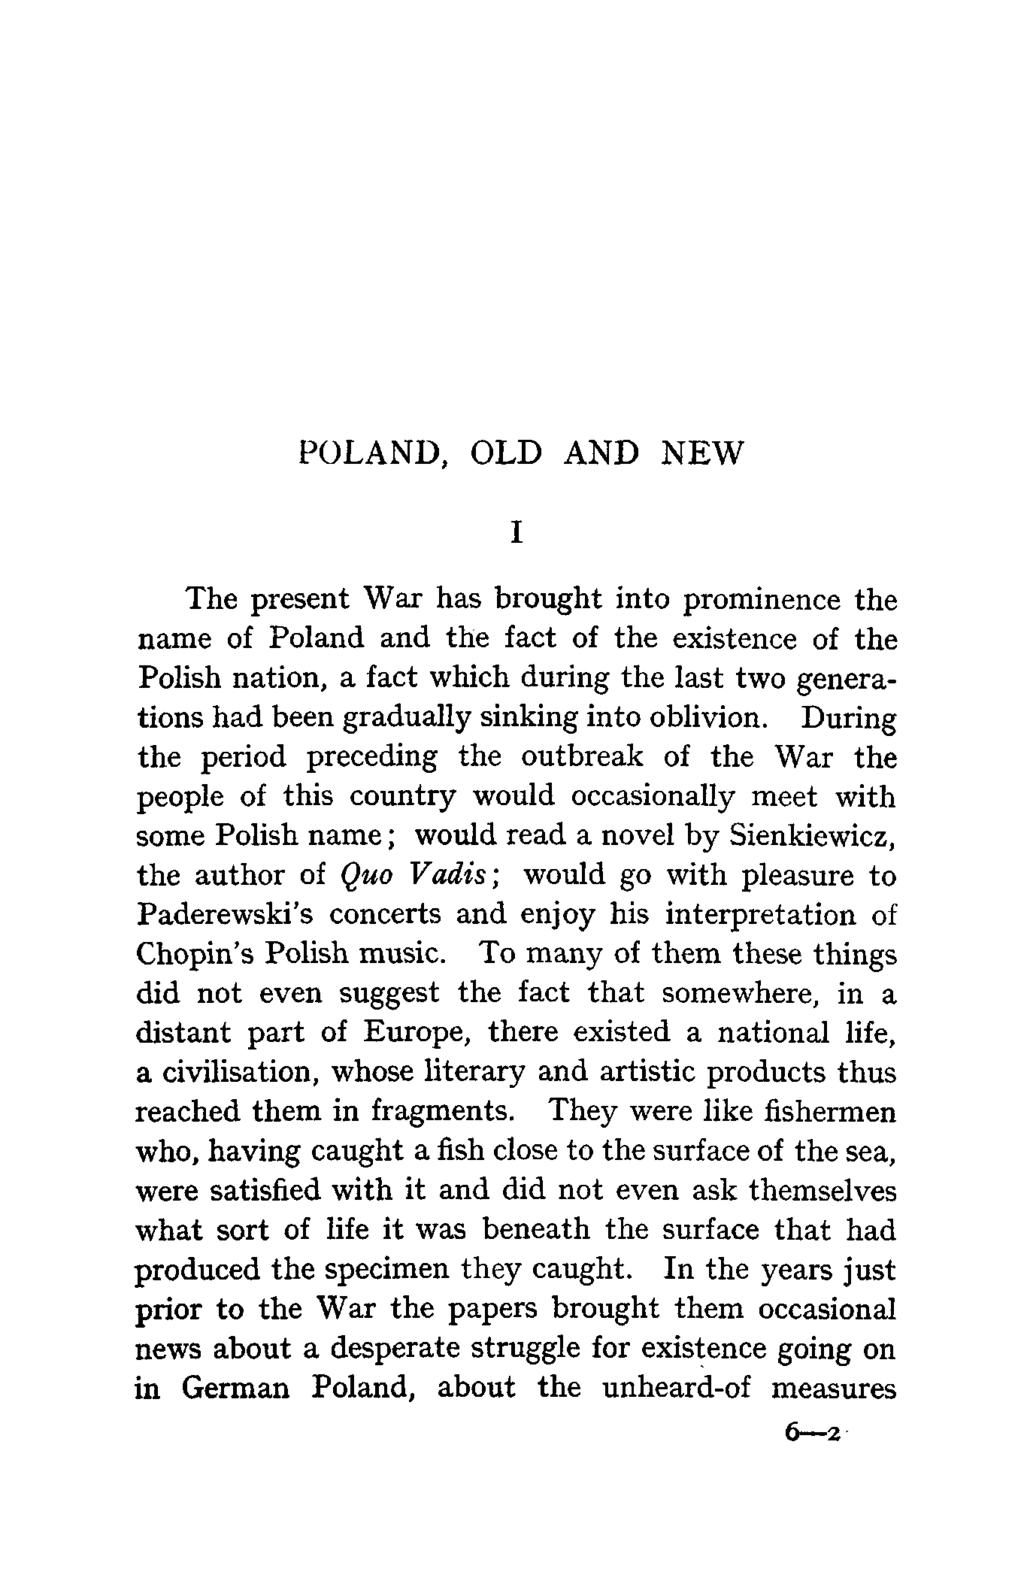 POLAND, OLD AND NEW I The present War has brought into prominence the name of Poland and the fact of the existence of the Polish nation, a fact which during the last two generations had been